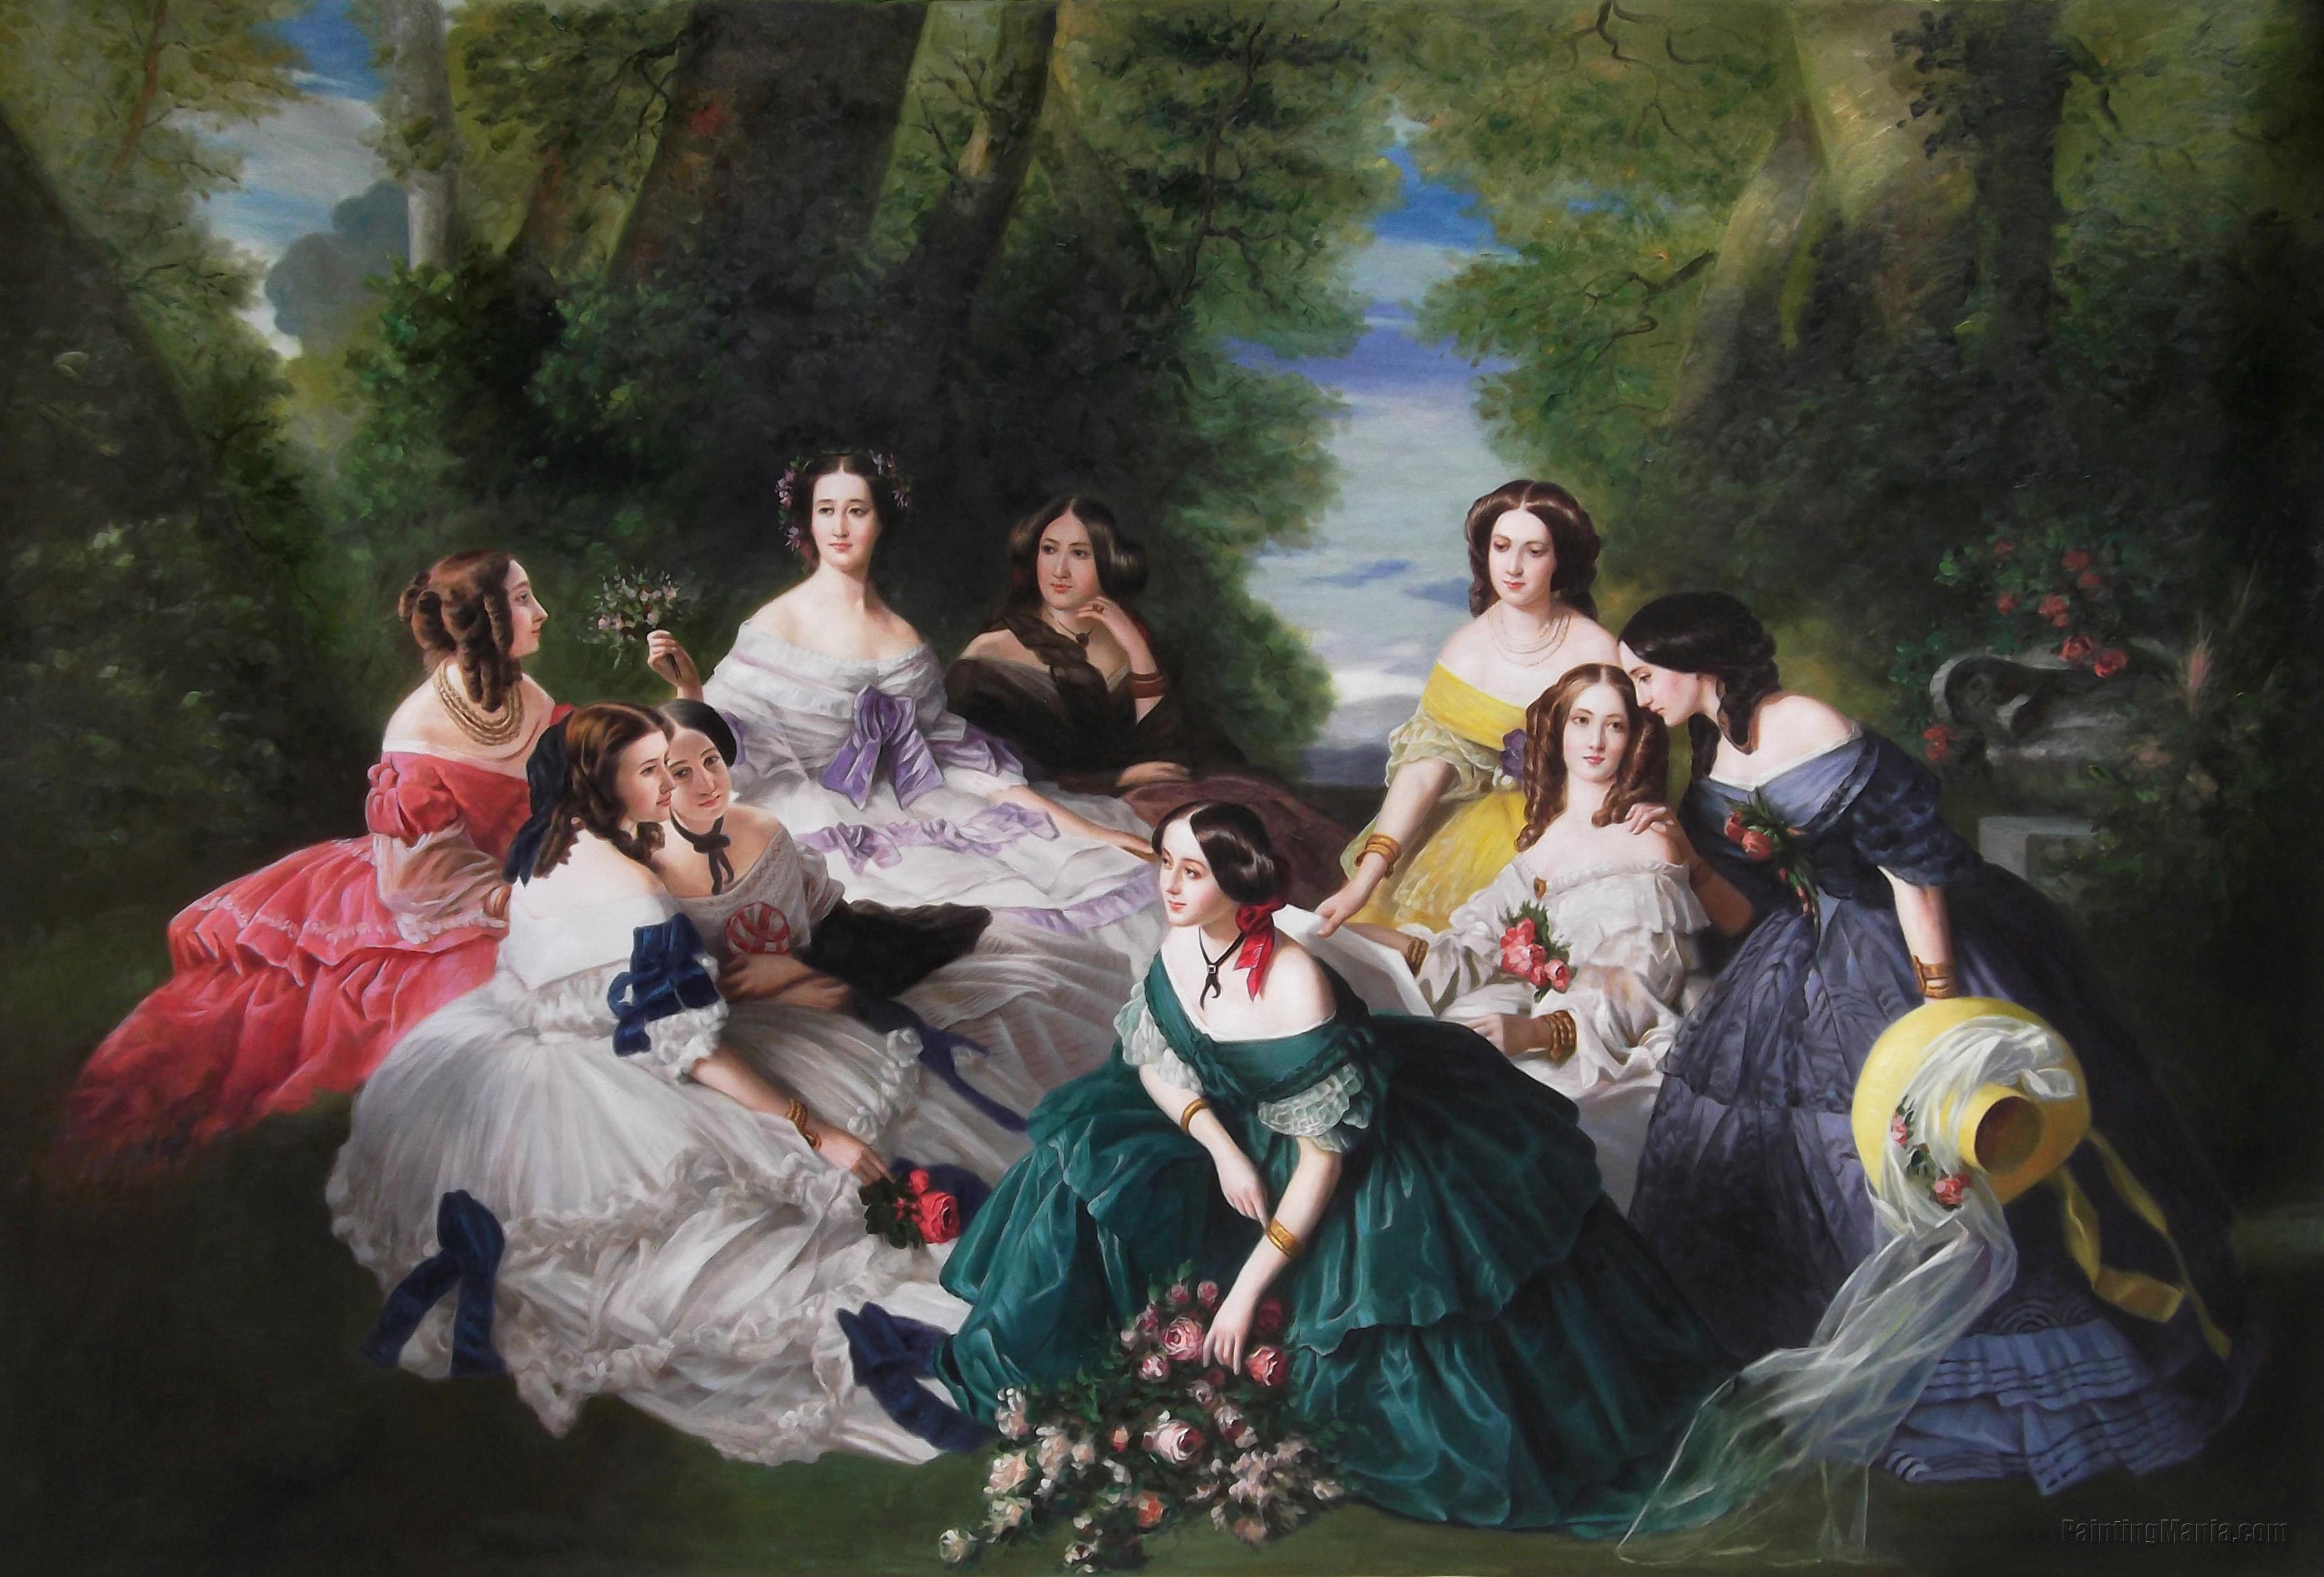 Empress Eugénie Surrounded by her Ladies in Waiting (1855) - Franz Xaver  Winterhalter Photographic Print for Sale by SALON DES ARTS